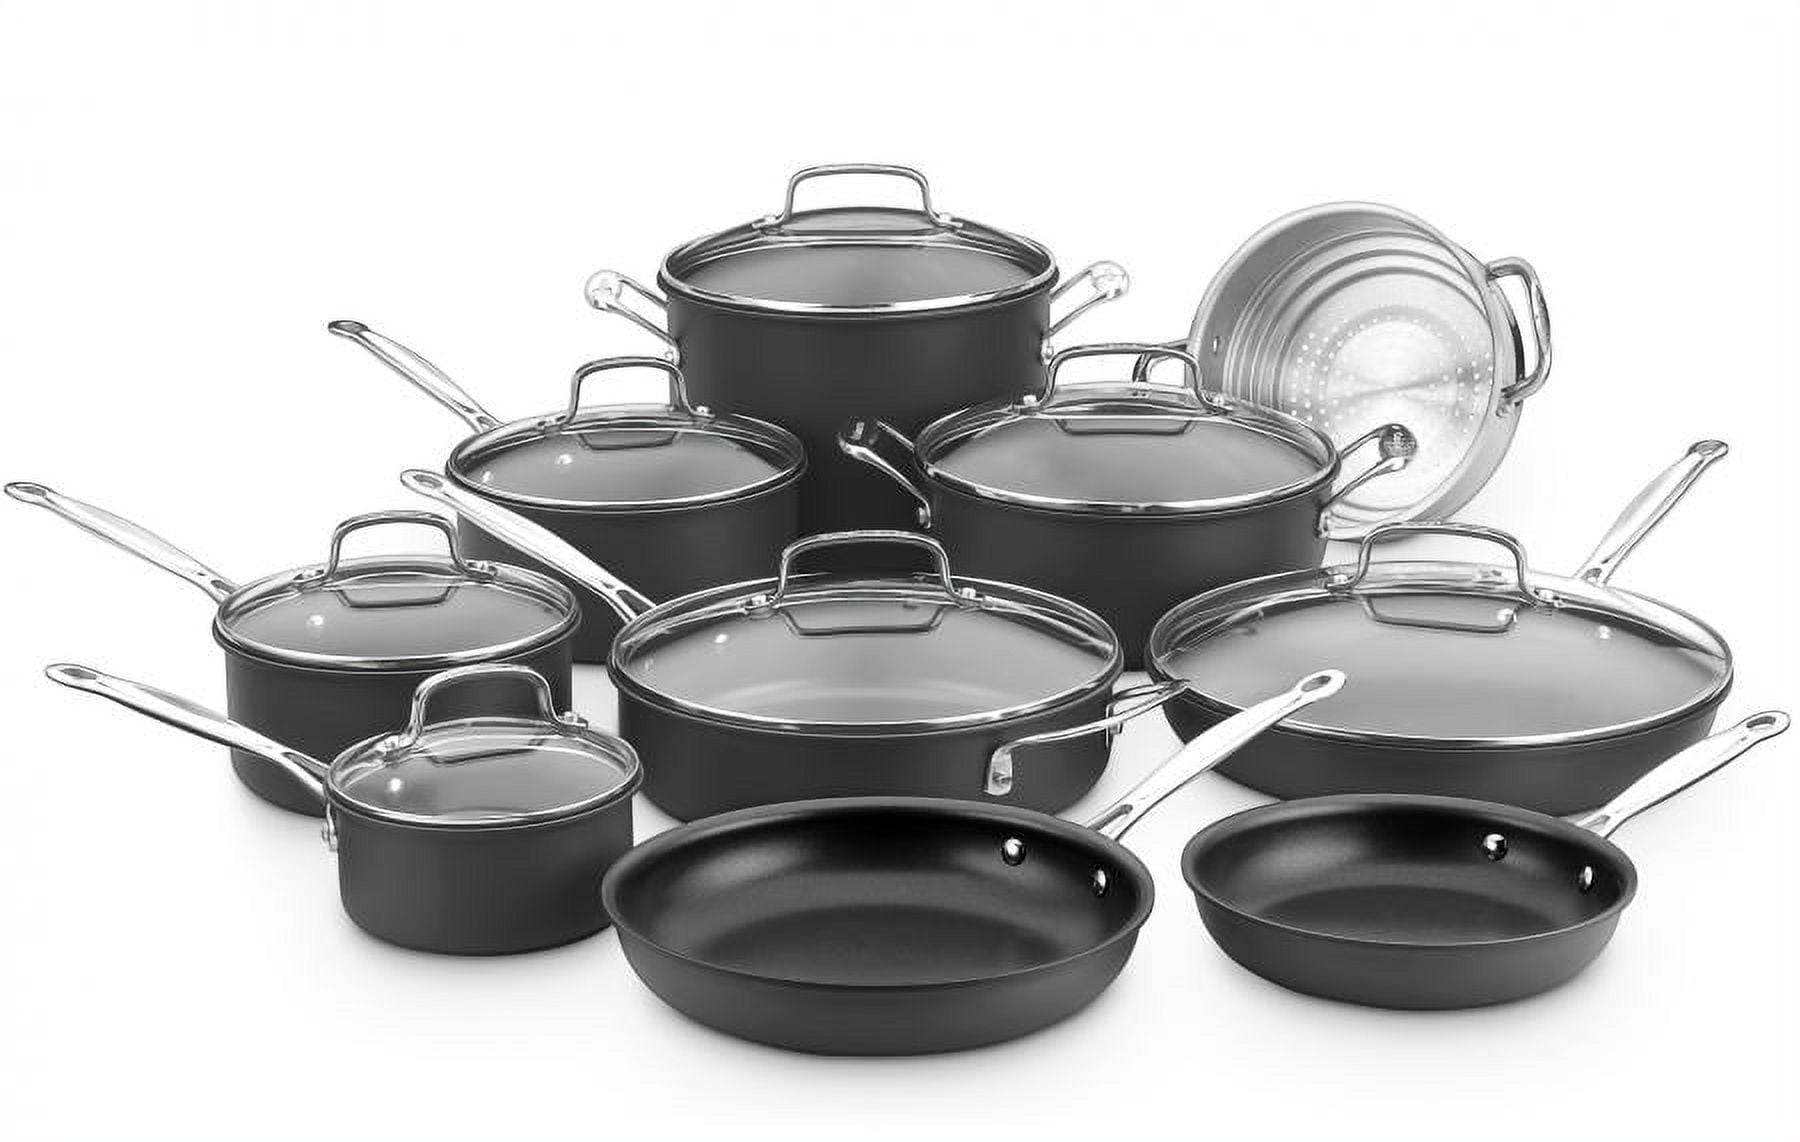 T-fal Ultimate Hard Anodized Nonstick Cookware Set 17 Piece Oven